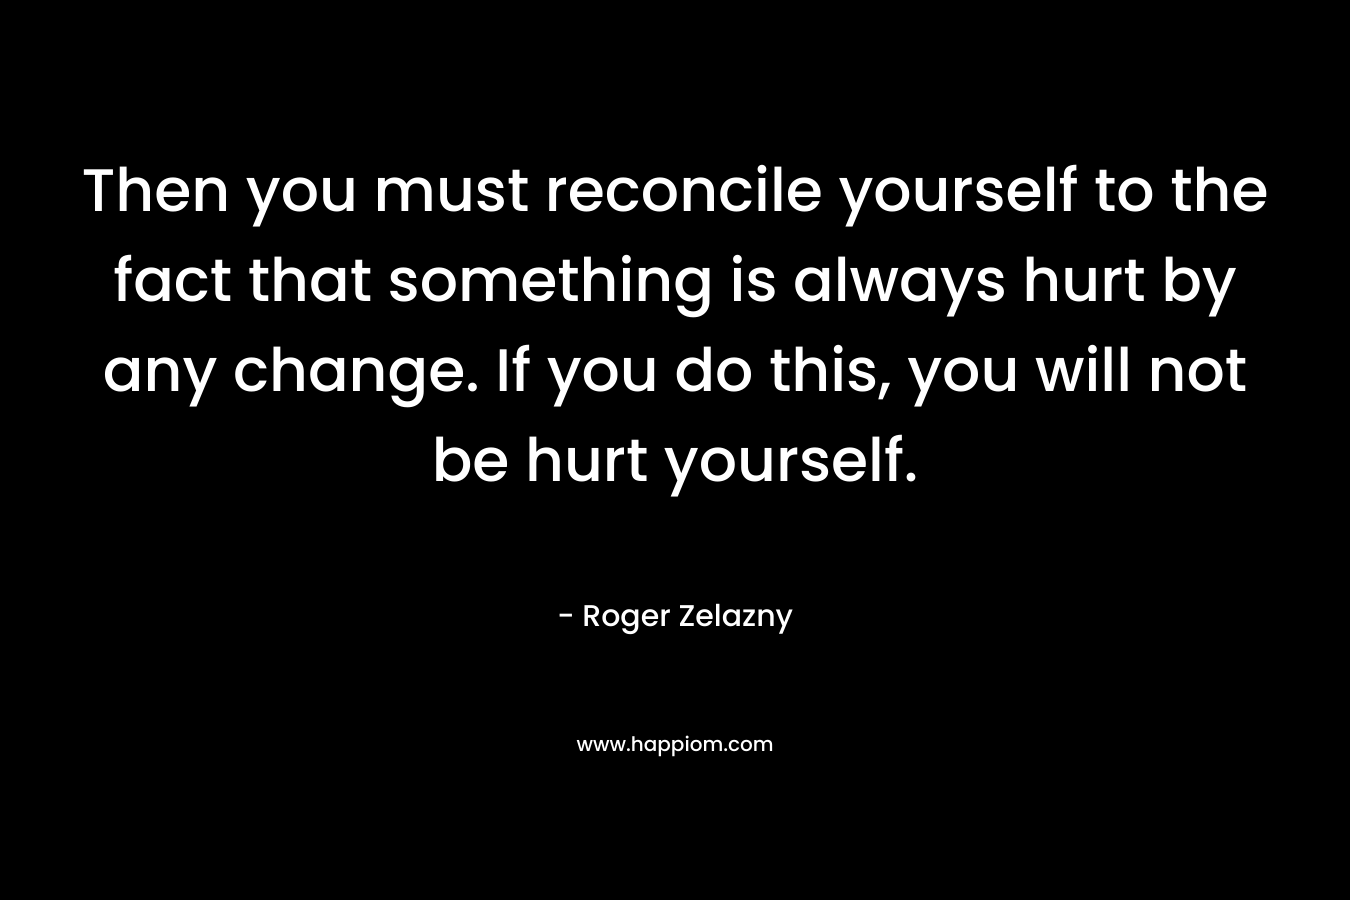 Then you must reconcile yourself to the fact that something is always hurt by any change. If you do this, you will not be hurt yourself.